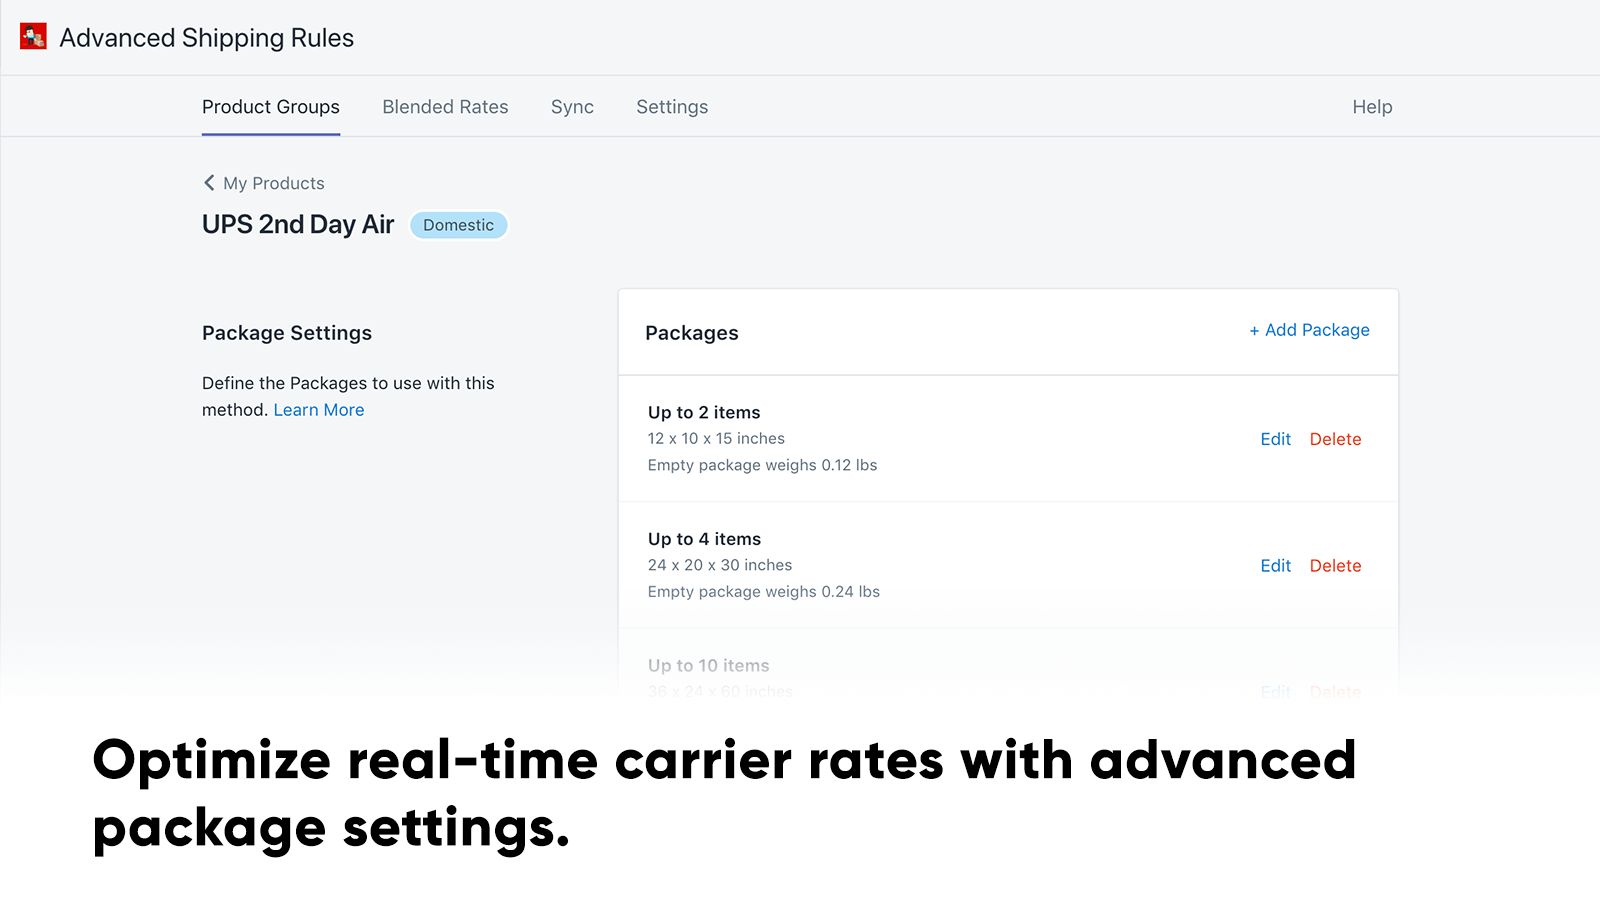 Optimize real-time carrier rates with package settings